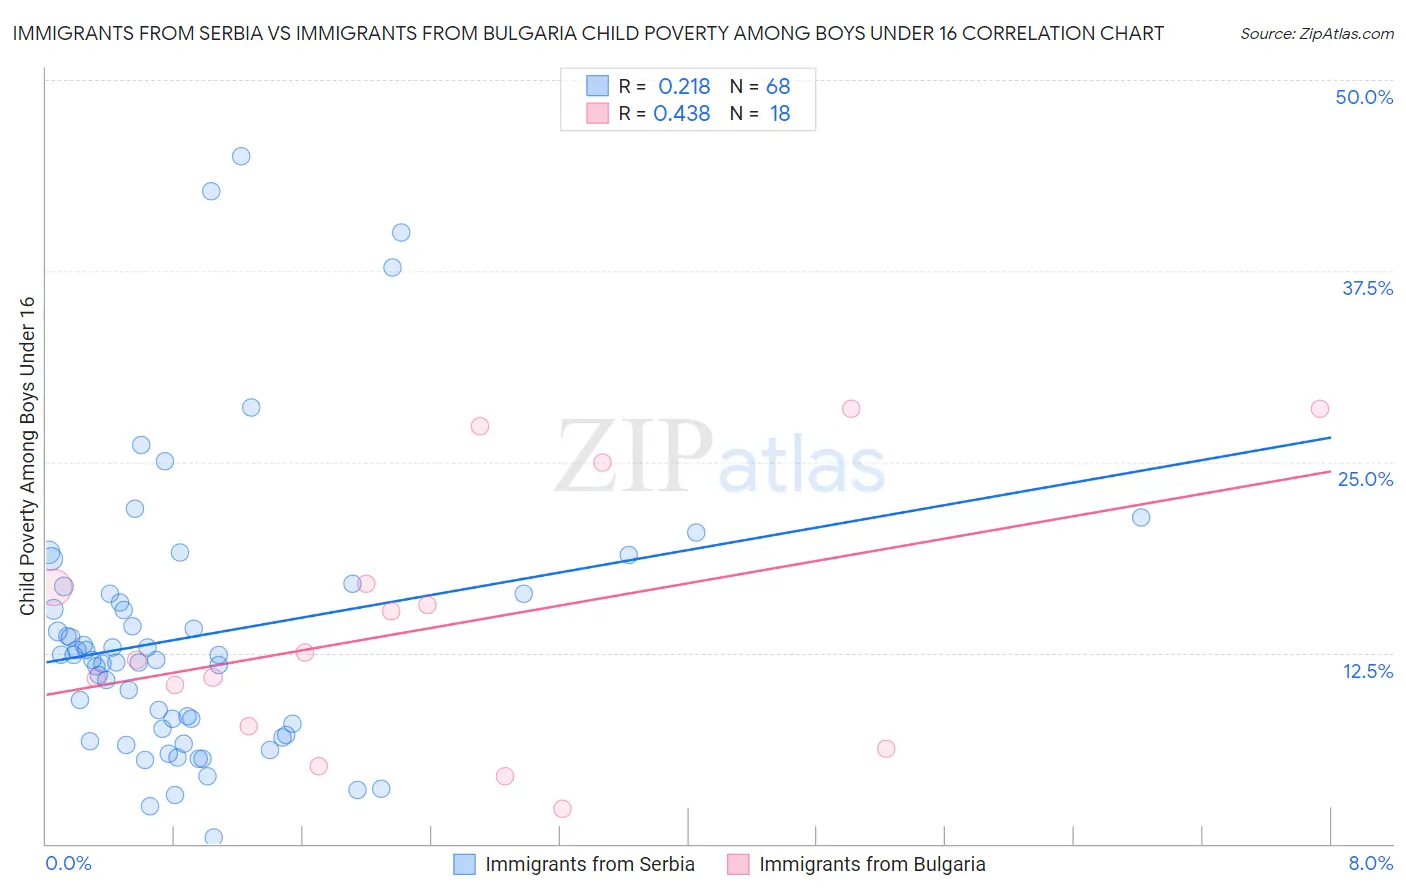 Immigrants from Serbia vs Immigrants from Bulgaria Child Poverty Among Boys Under 16